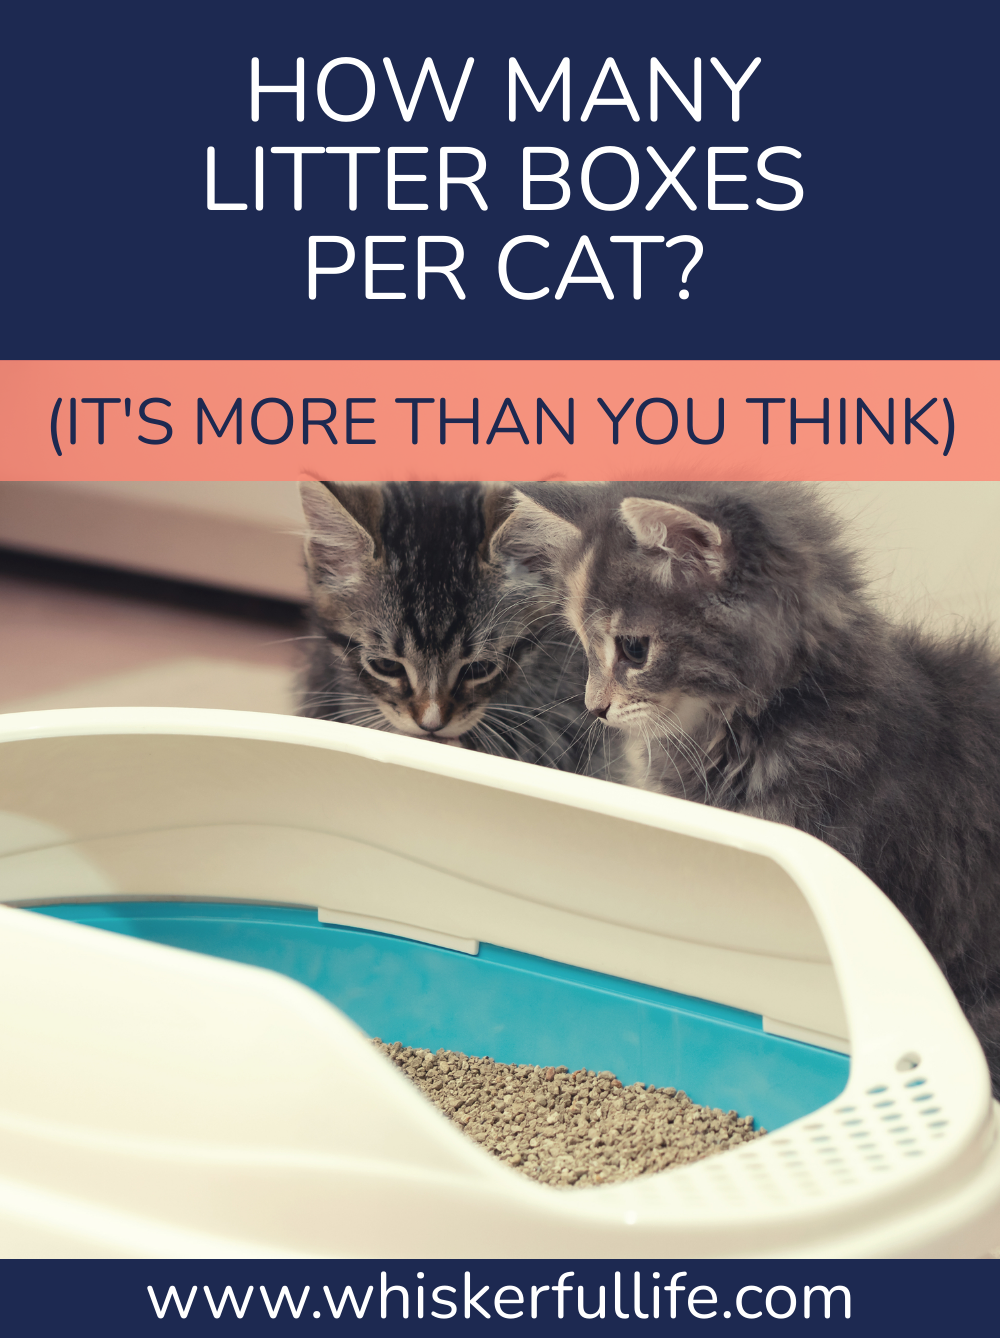 How Many Litter Boxes Per Cat? (It's More Then you Think)